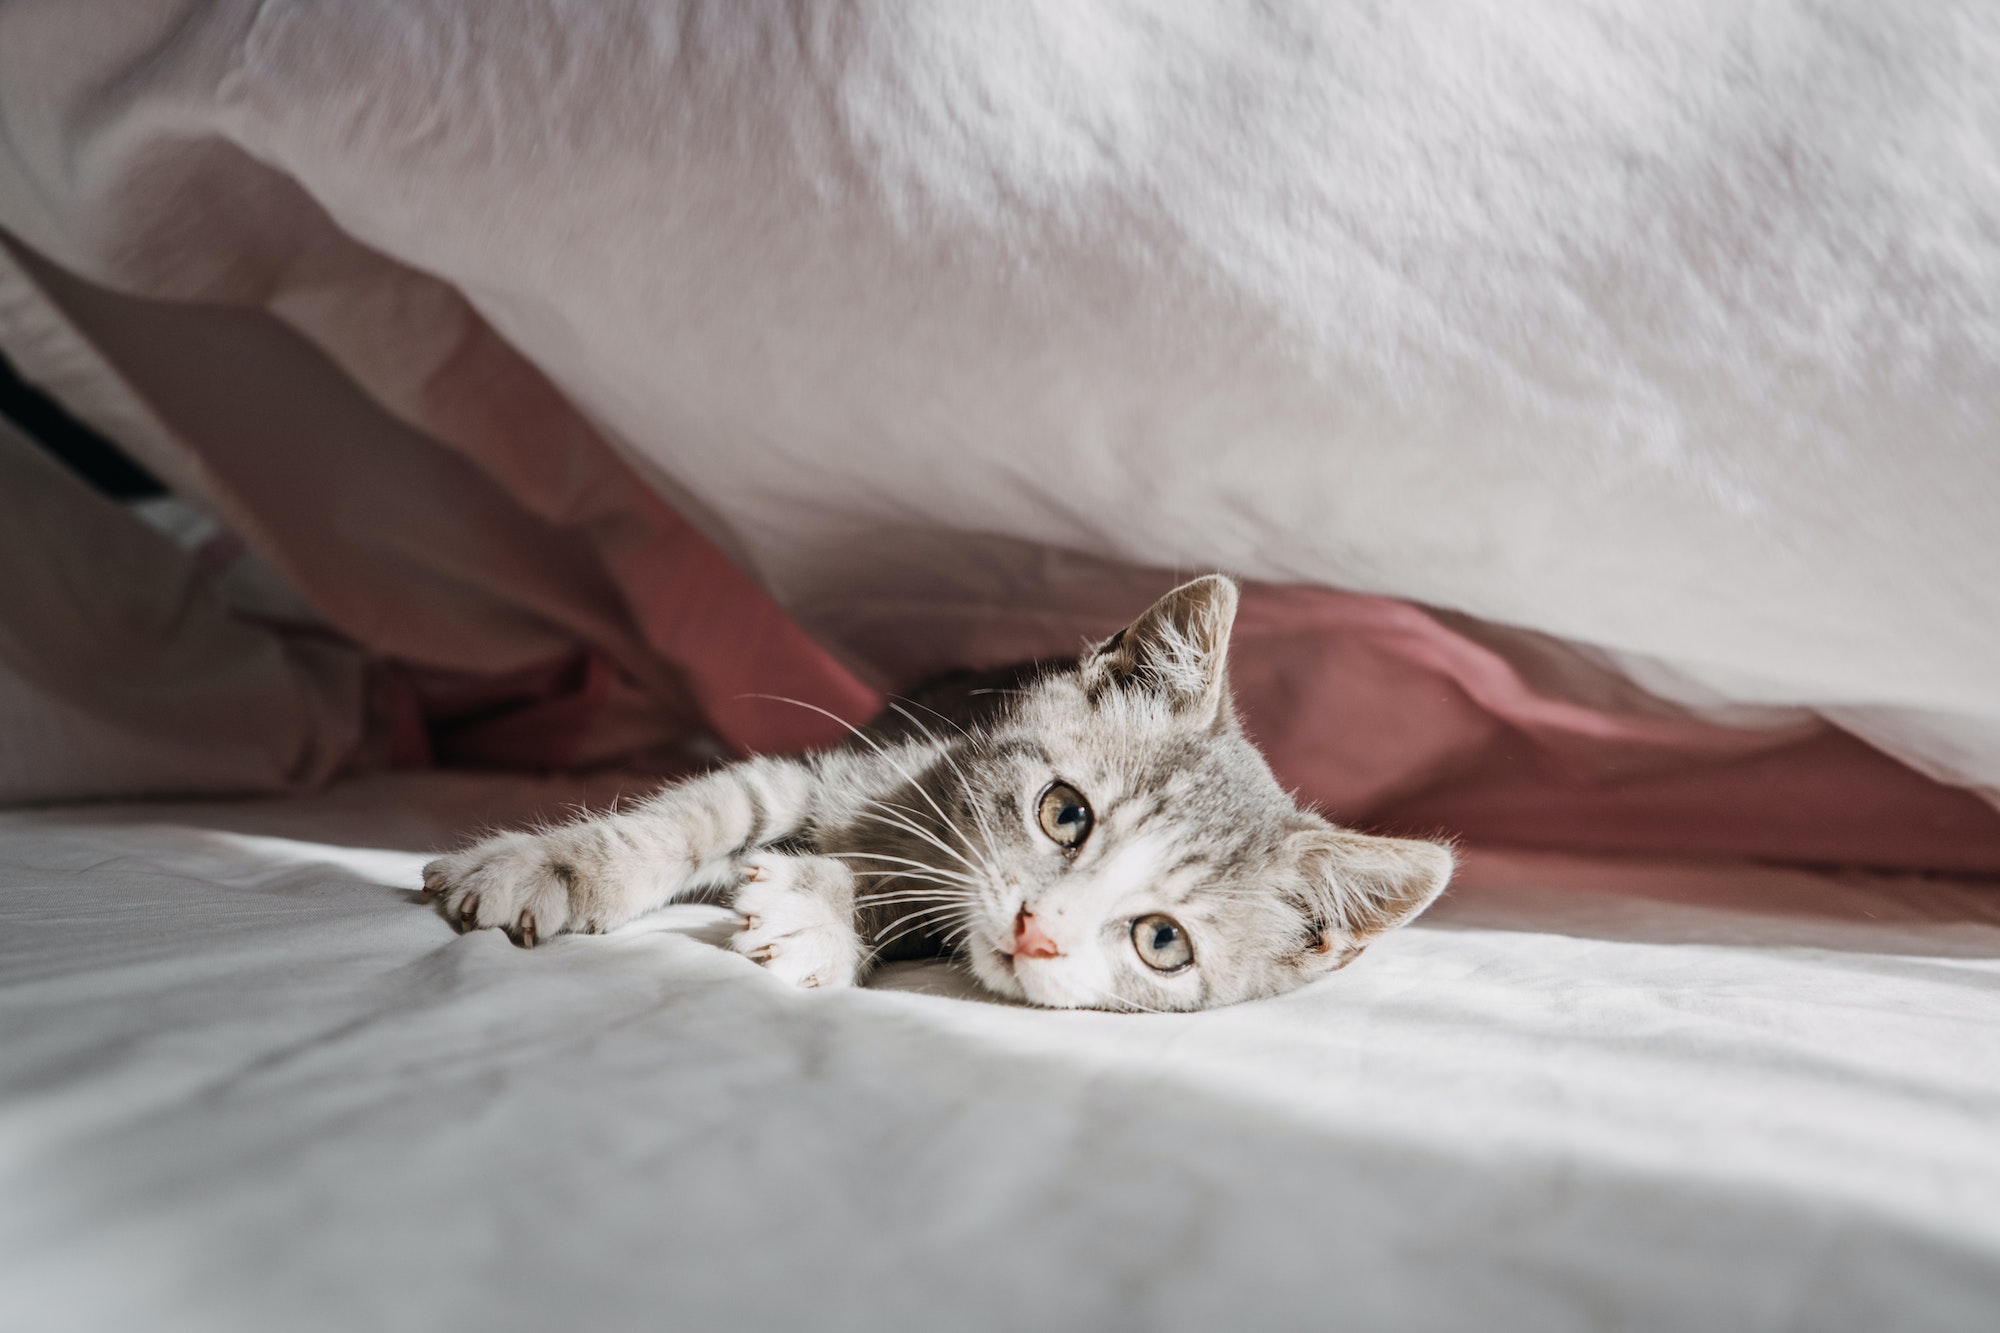 How to Clean Cat Pee From a Mattress